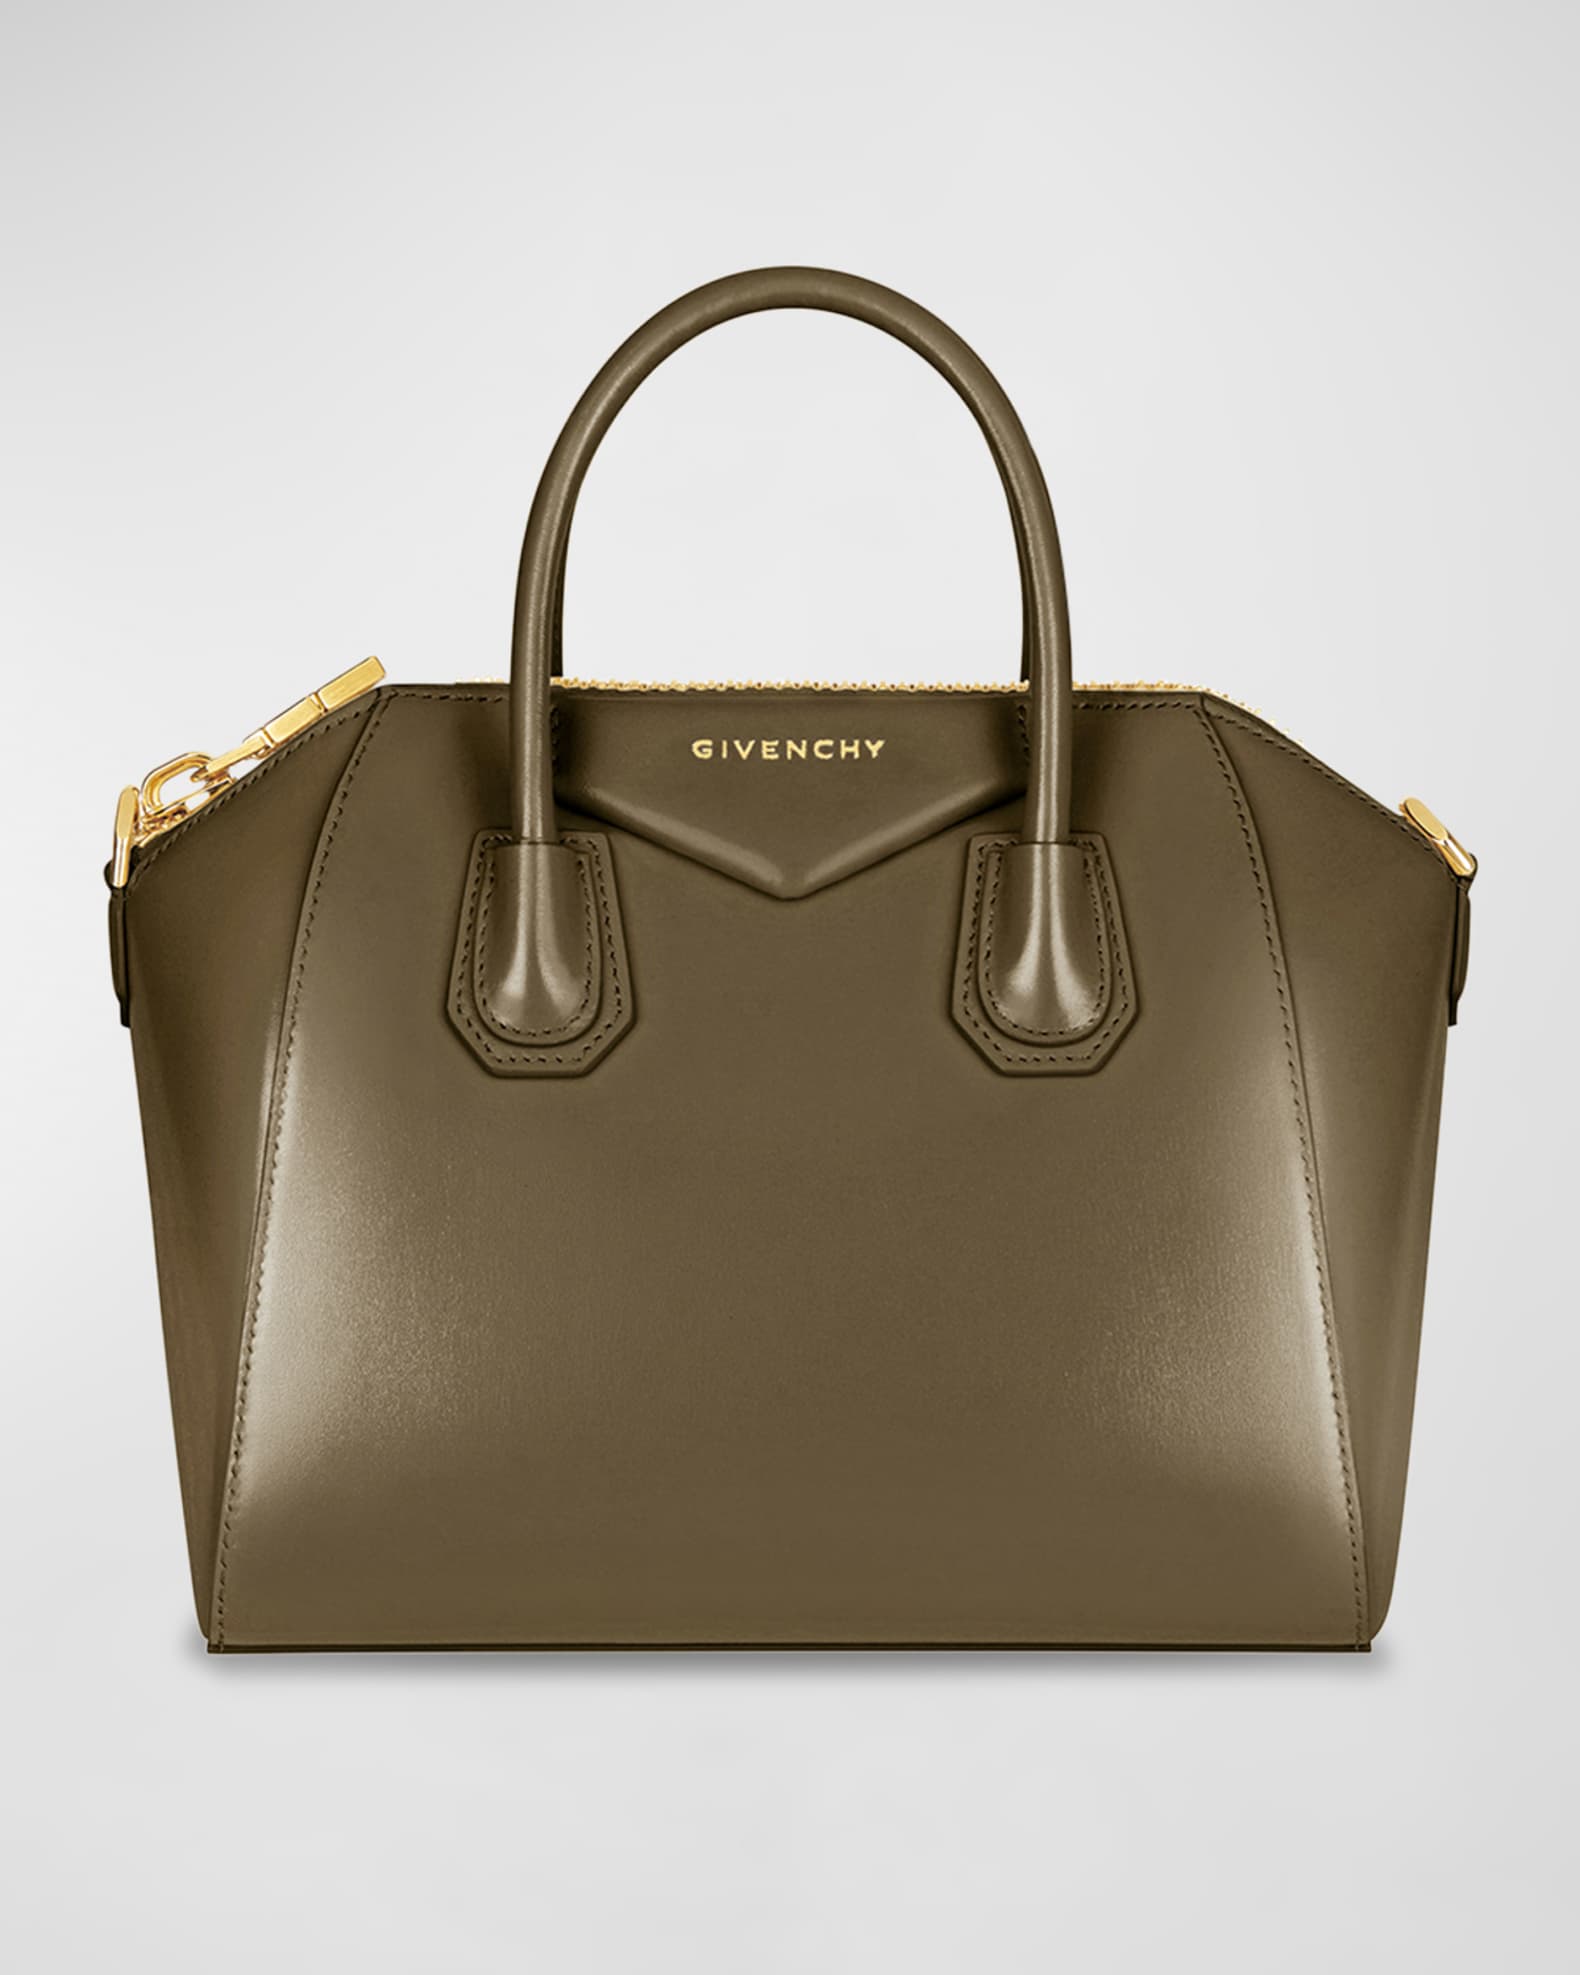 GIVENCHY Antigona Nano Bag: Reveal, Review, What Fits In and Mod